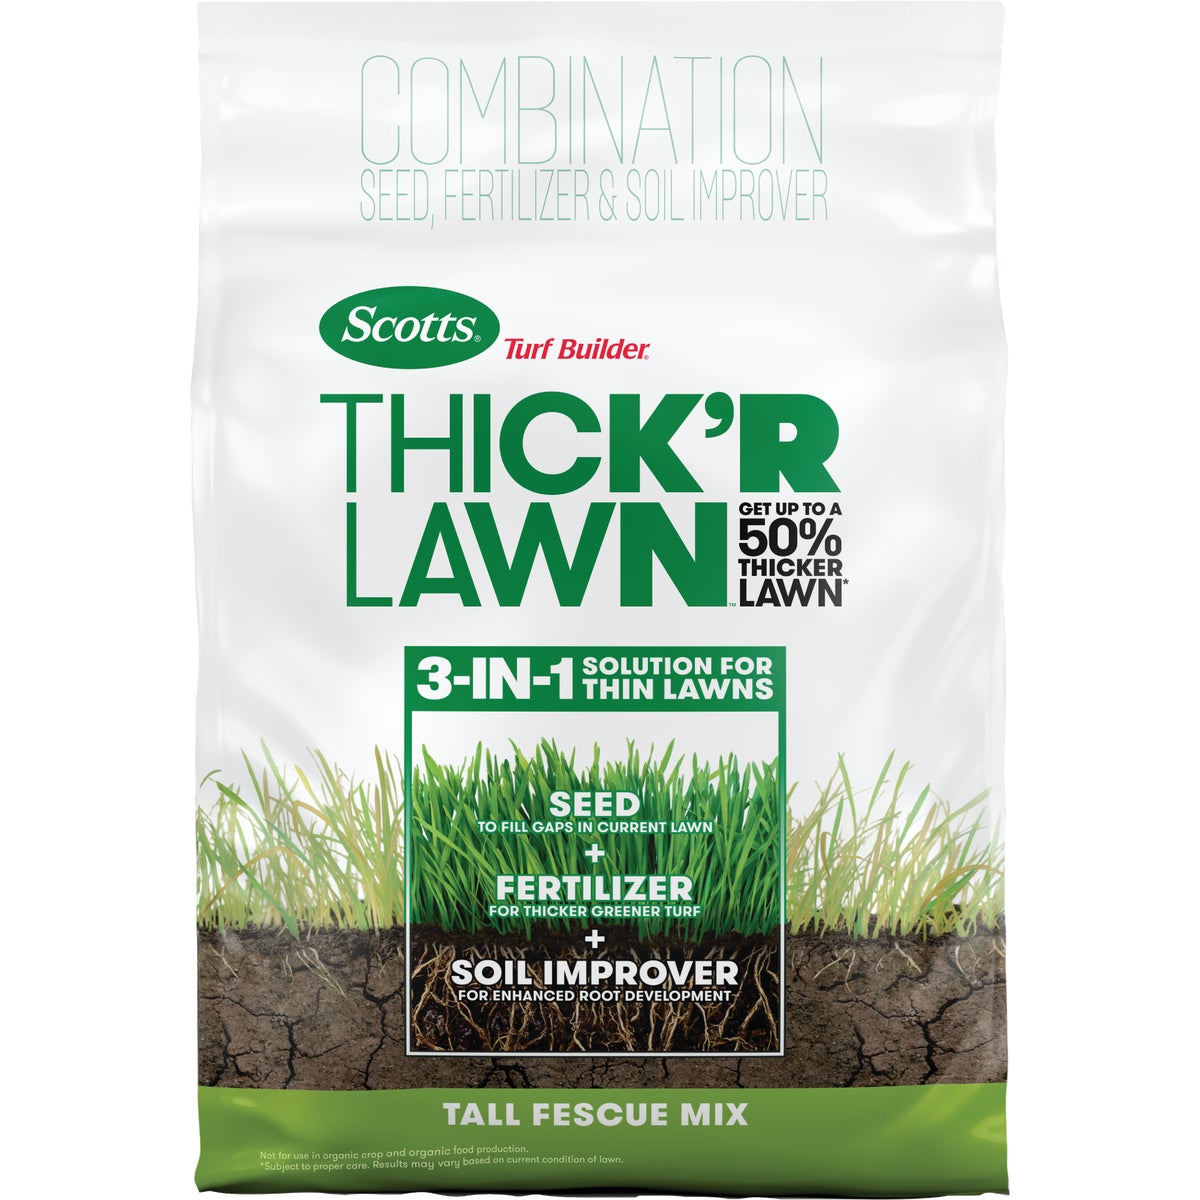 Item 705573, Grass seed that provides a 3-in-1 solution for thin lawns.